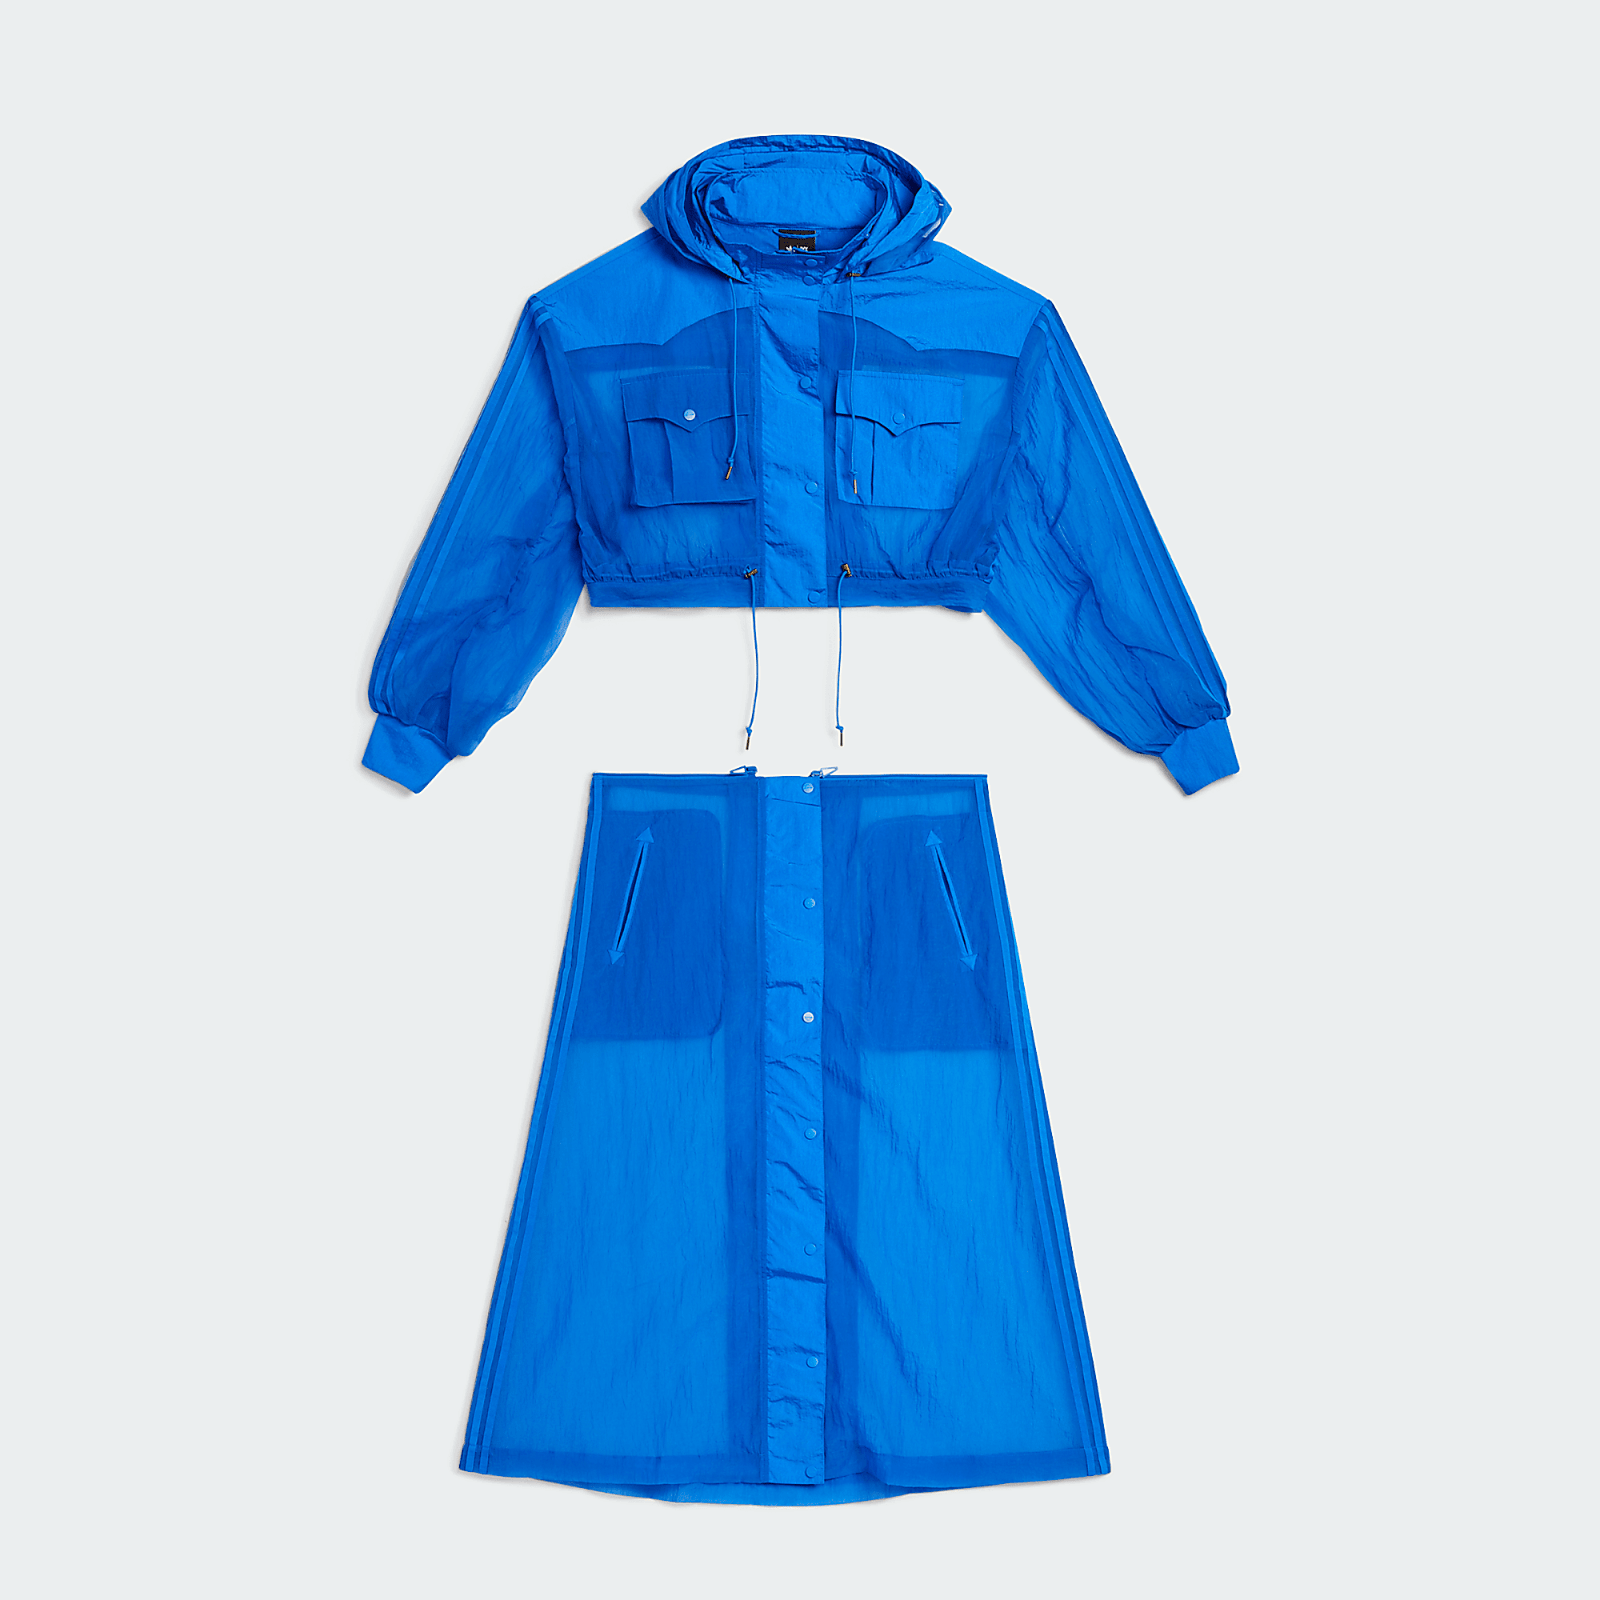 ADIDAS X IVY PARK COVERUP JACKET Glory Glow Blue Rodeo Collection Size M - SVNYFancy